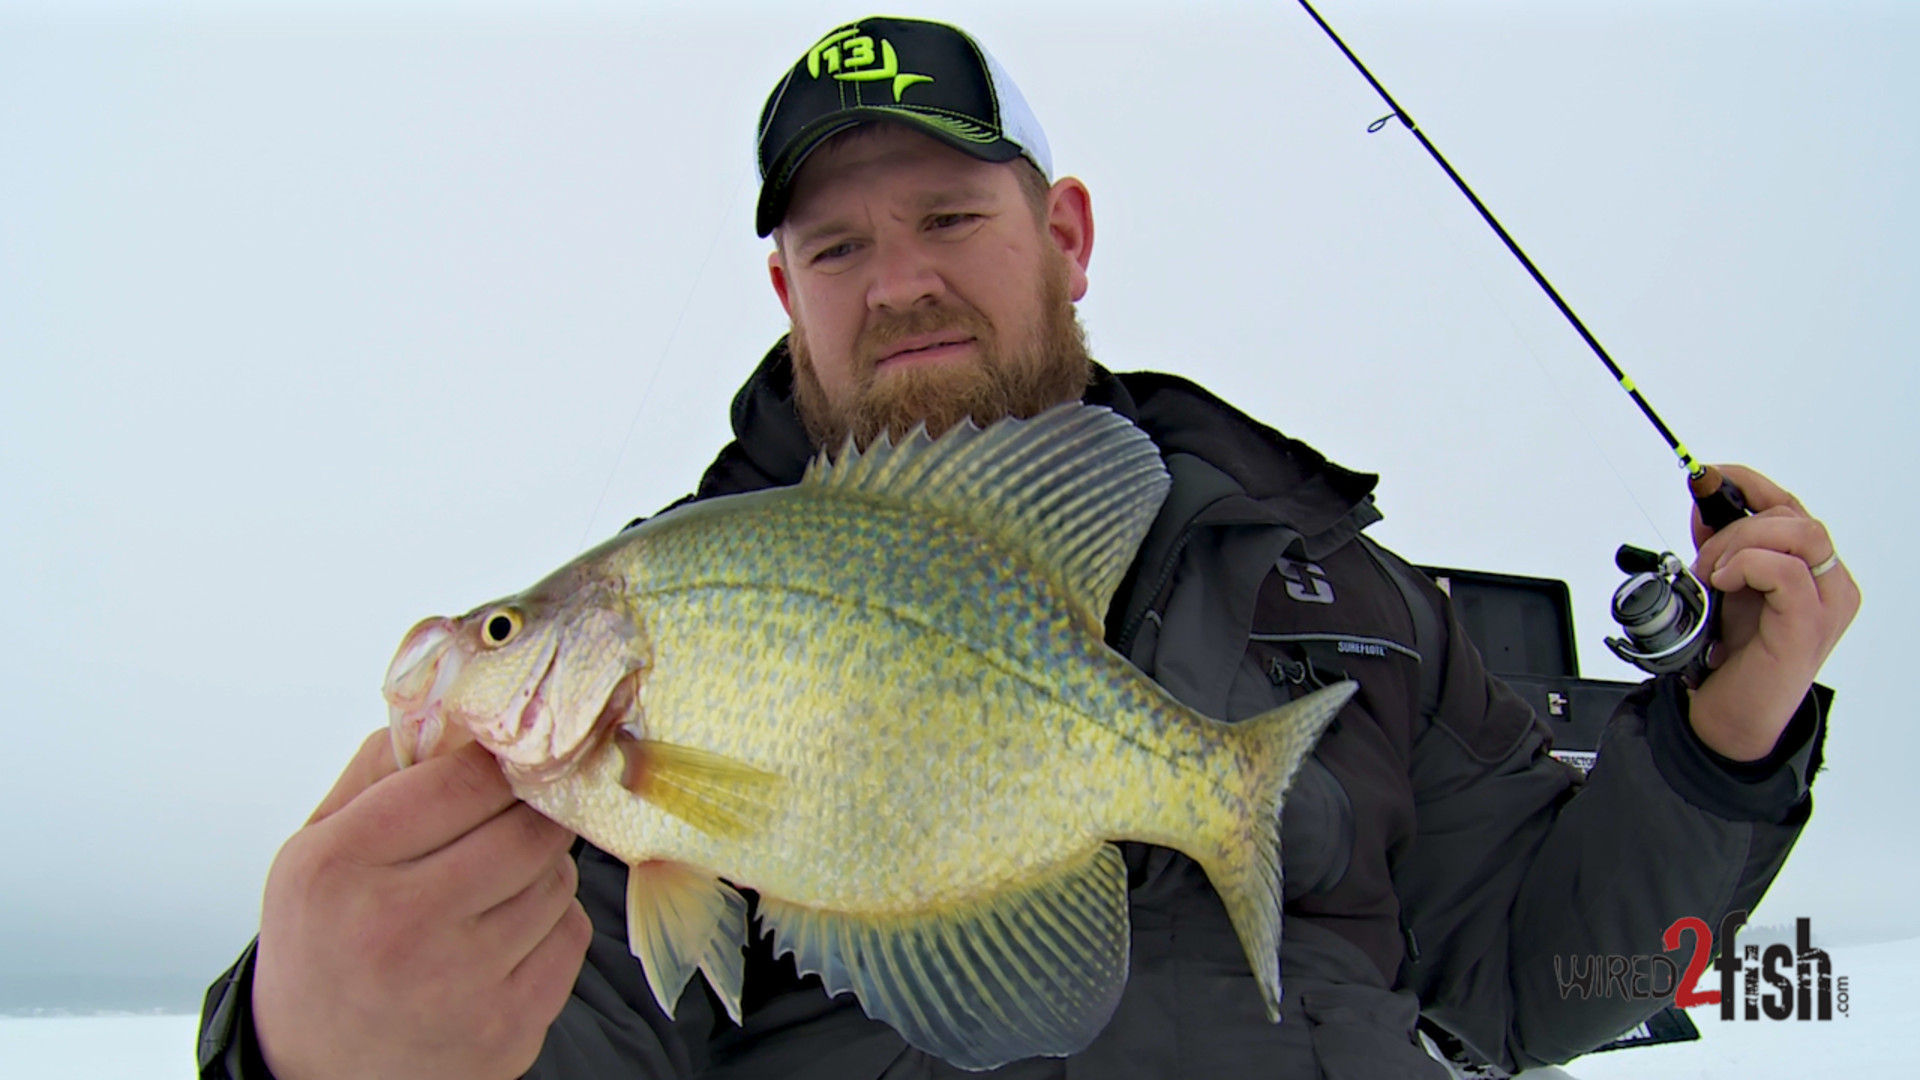 Detect Crappie “Lift” Bites Through the Ice - Wired2Fish